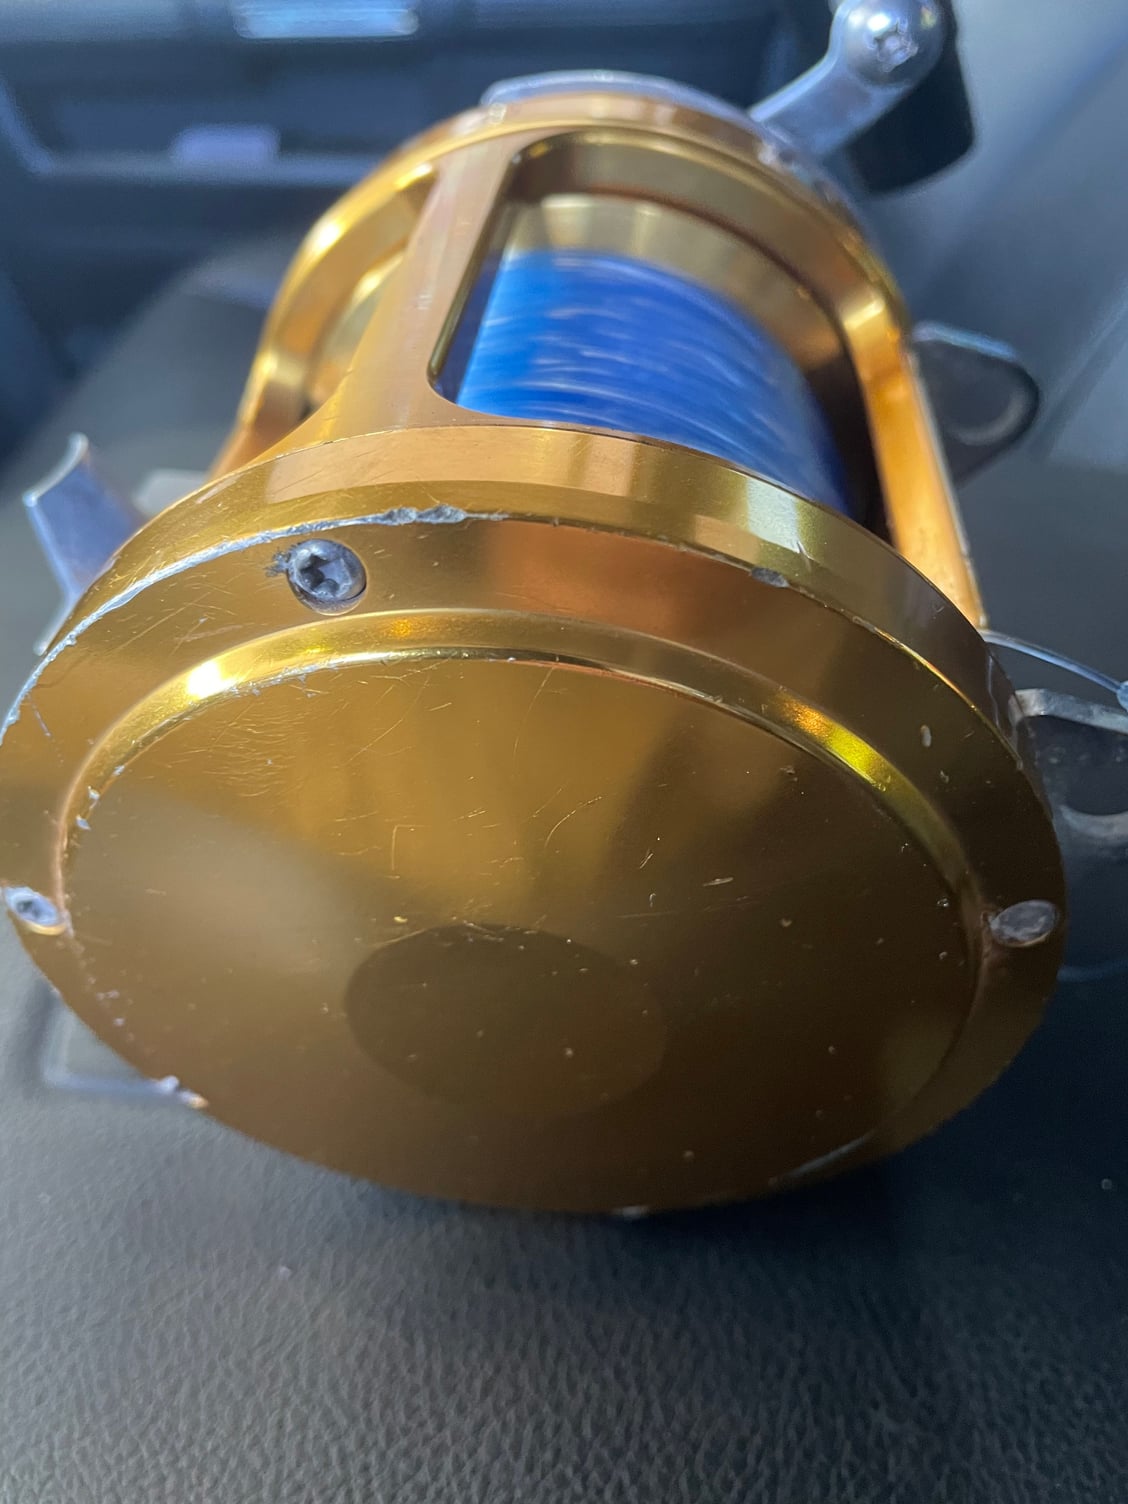 Adhesive tape on the reel - The Hull Truth - Boating and Fishing Forum